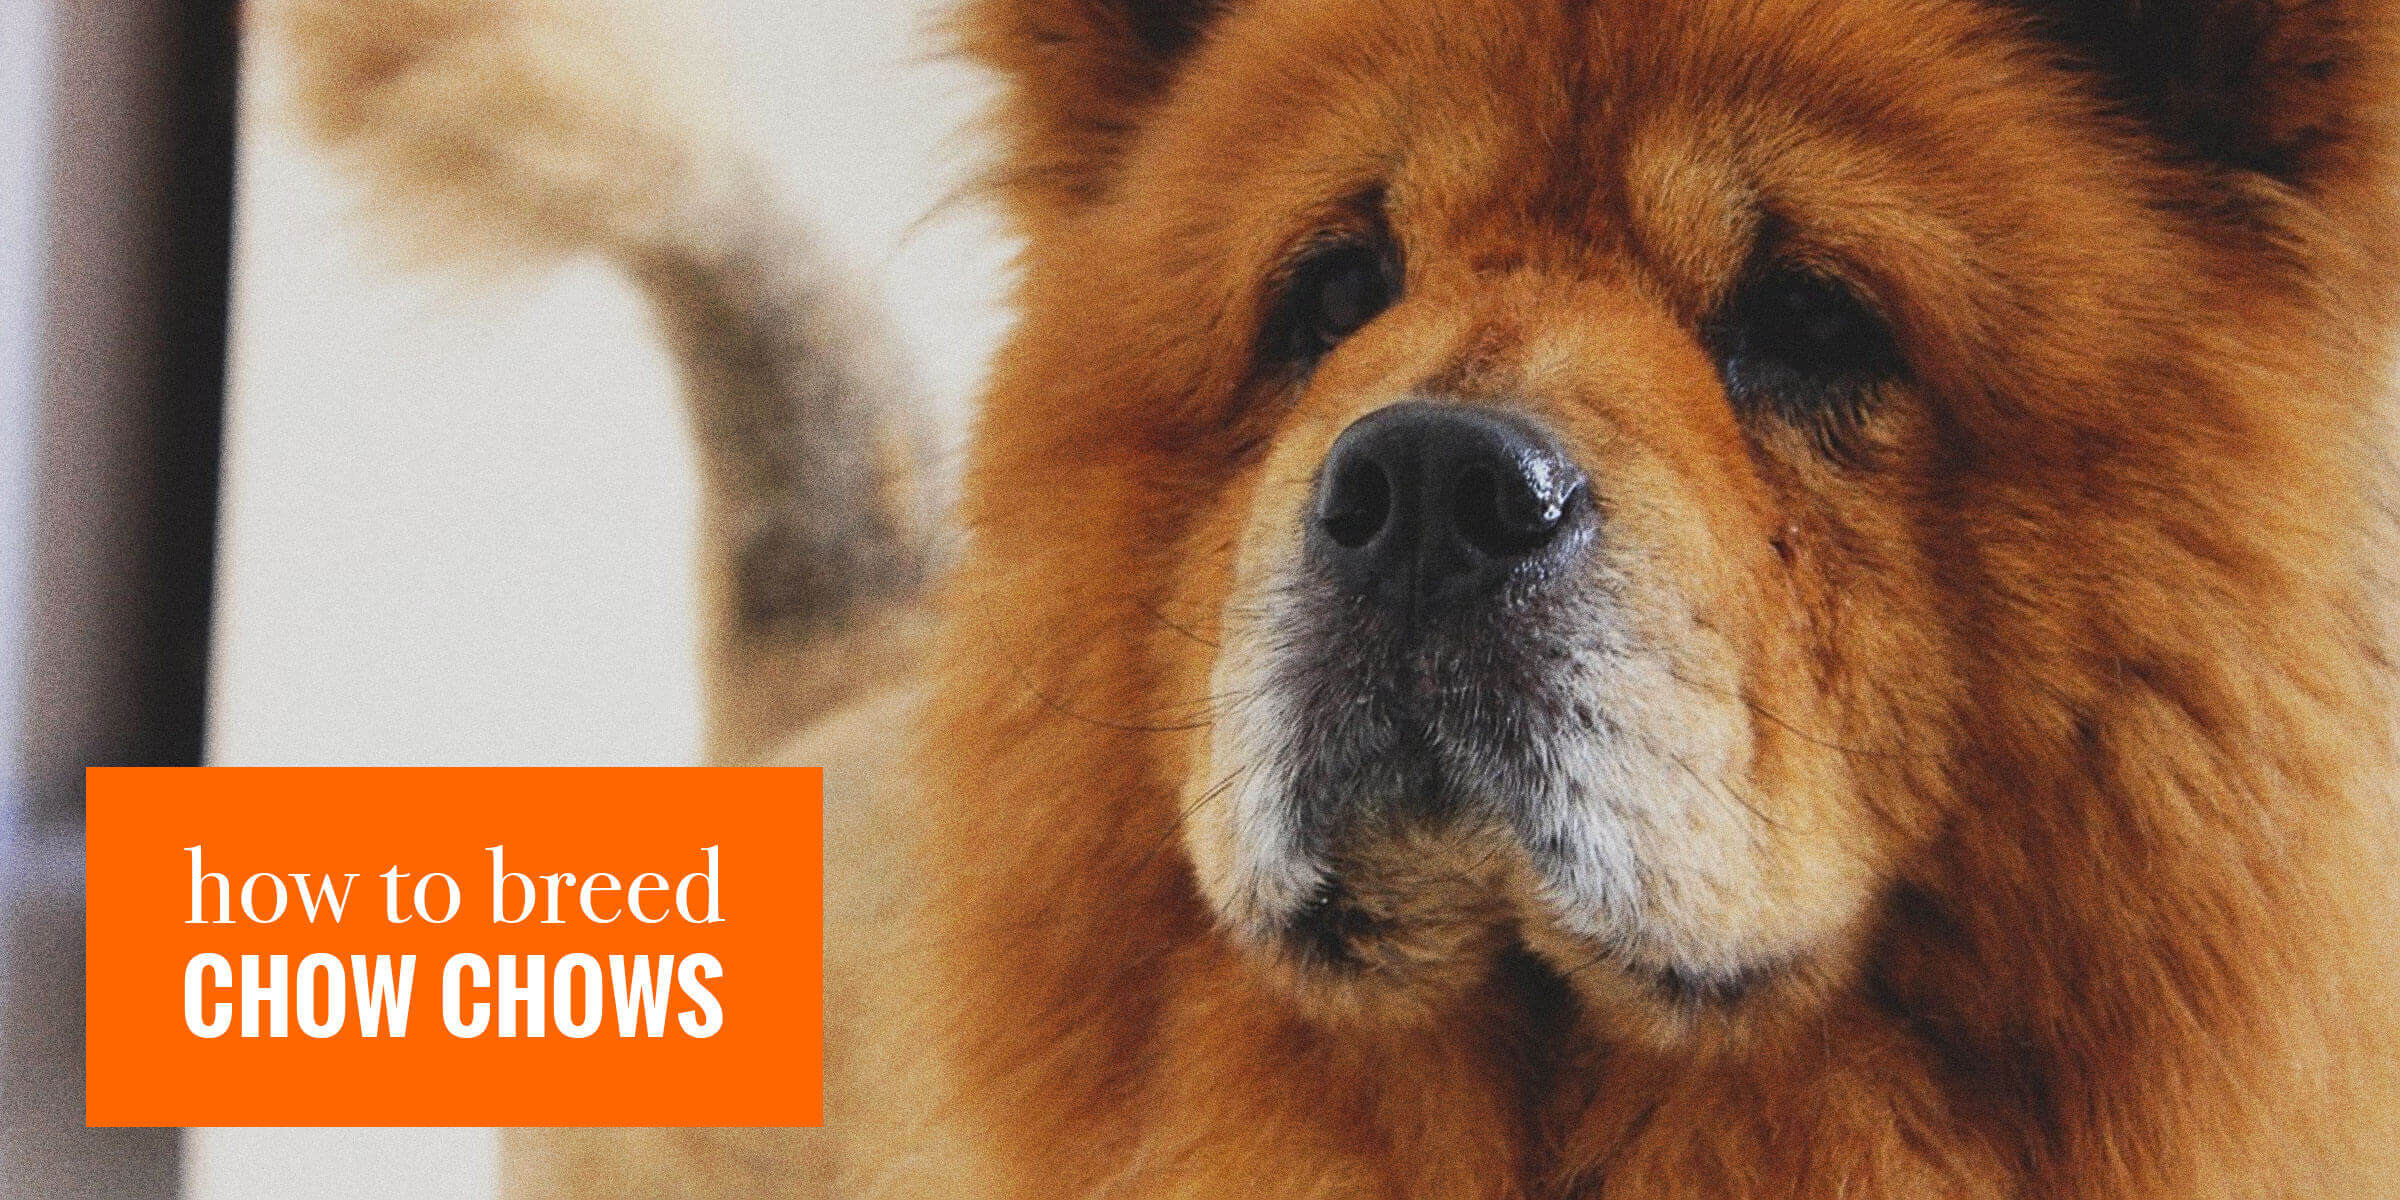 How To Breed Chow Chows